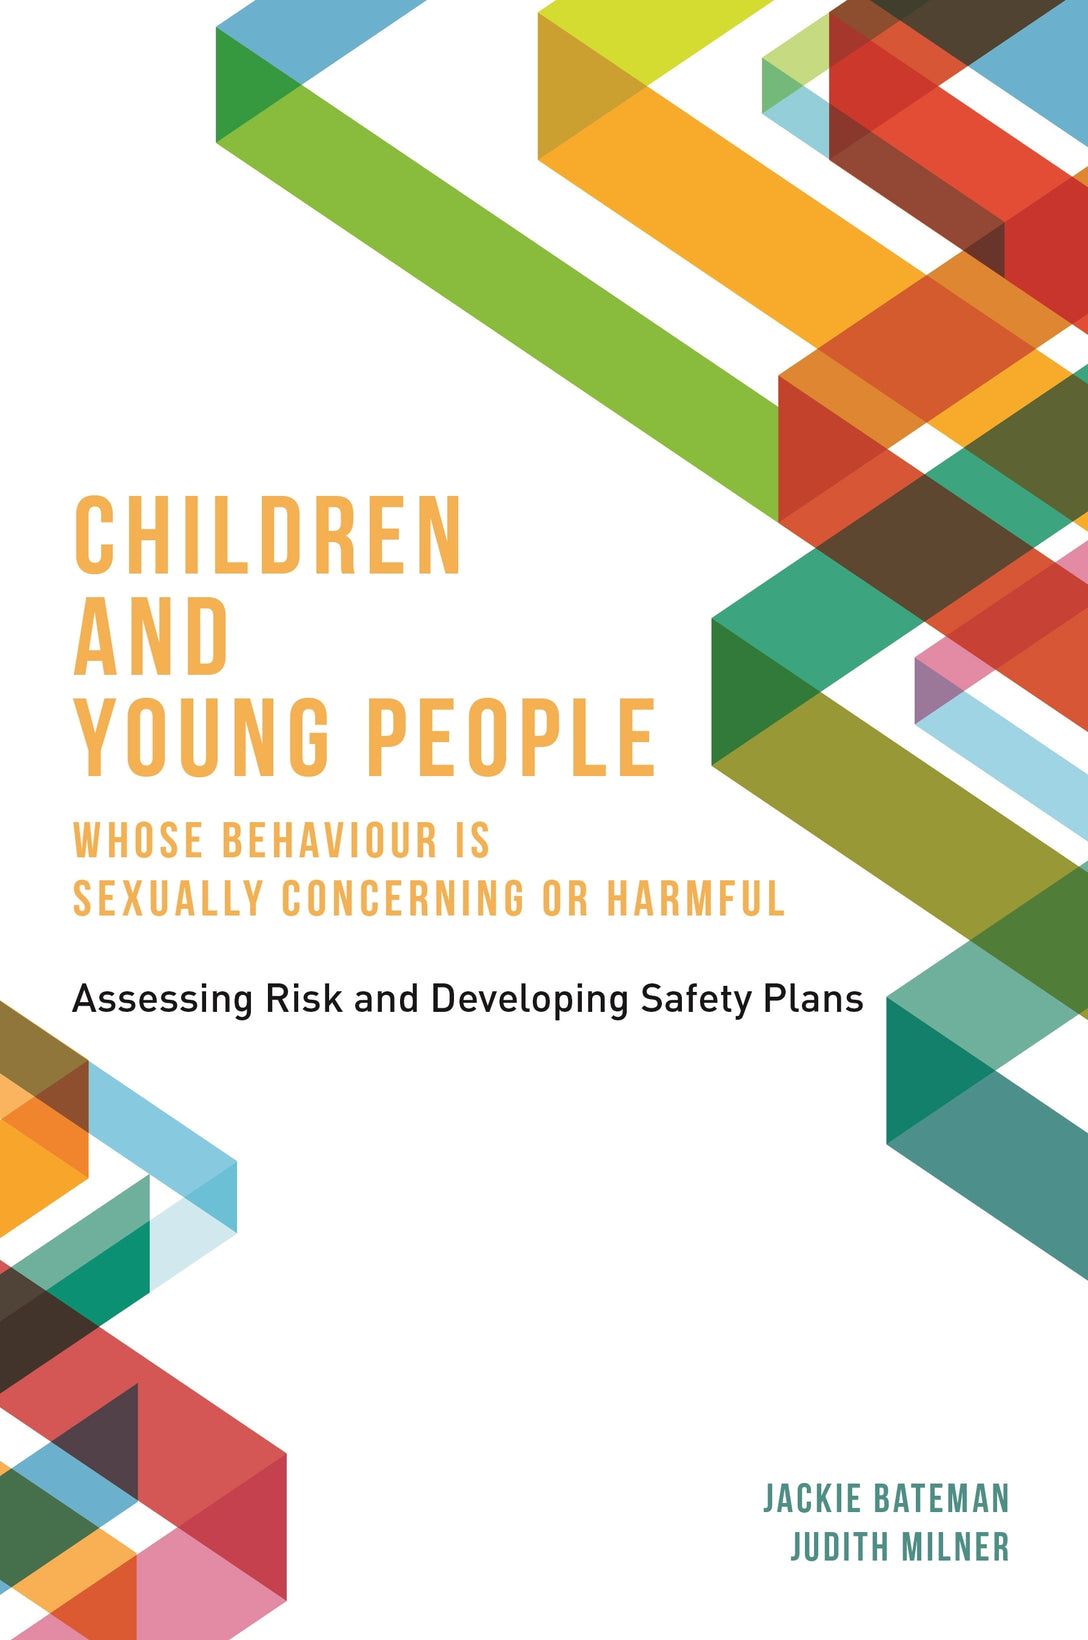 Children and Young People Whose Behaviour is Sexually Concerning or Harmful by Judith Milner, Jackie Bateman